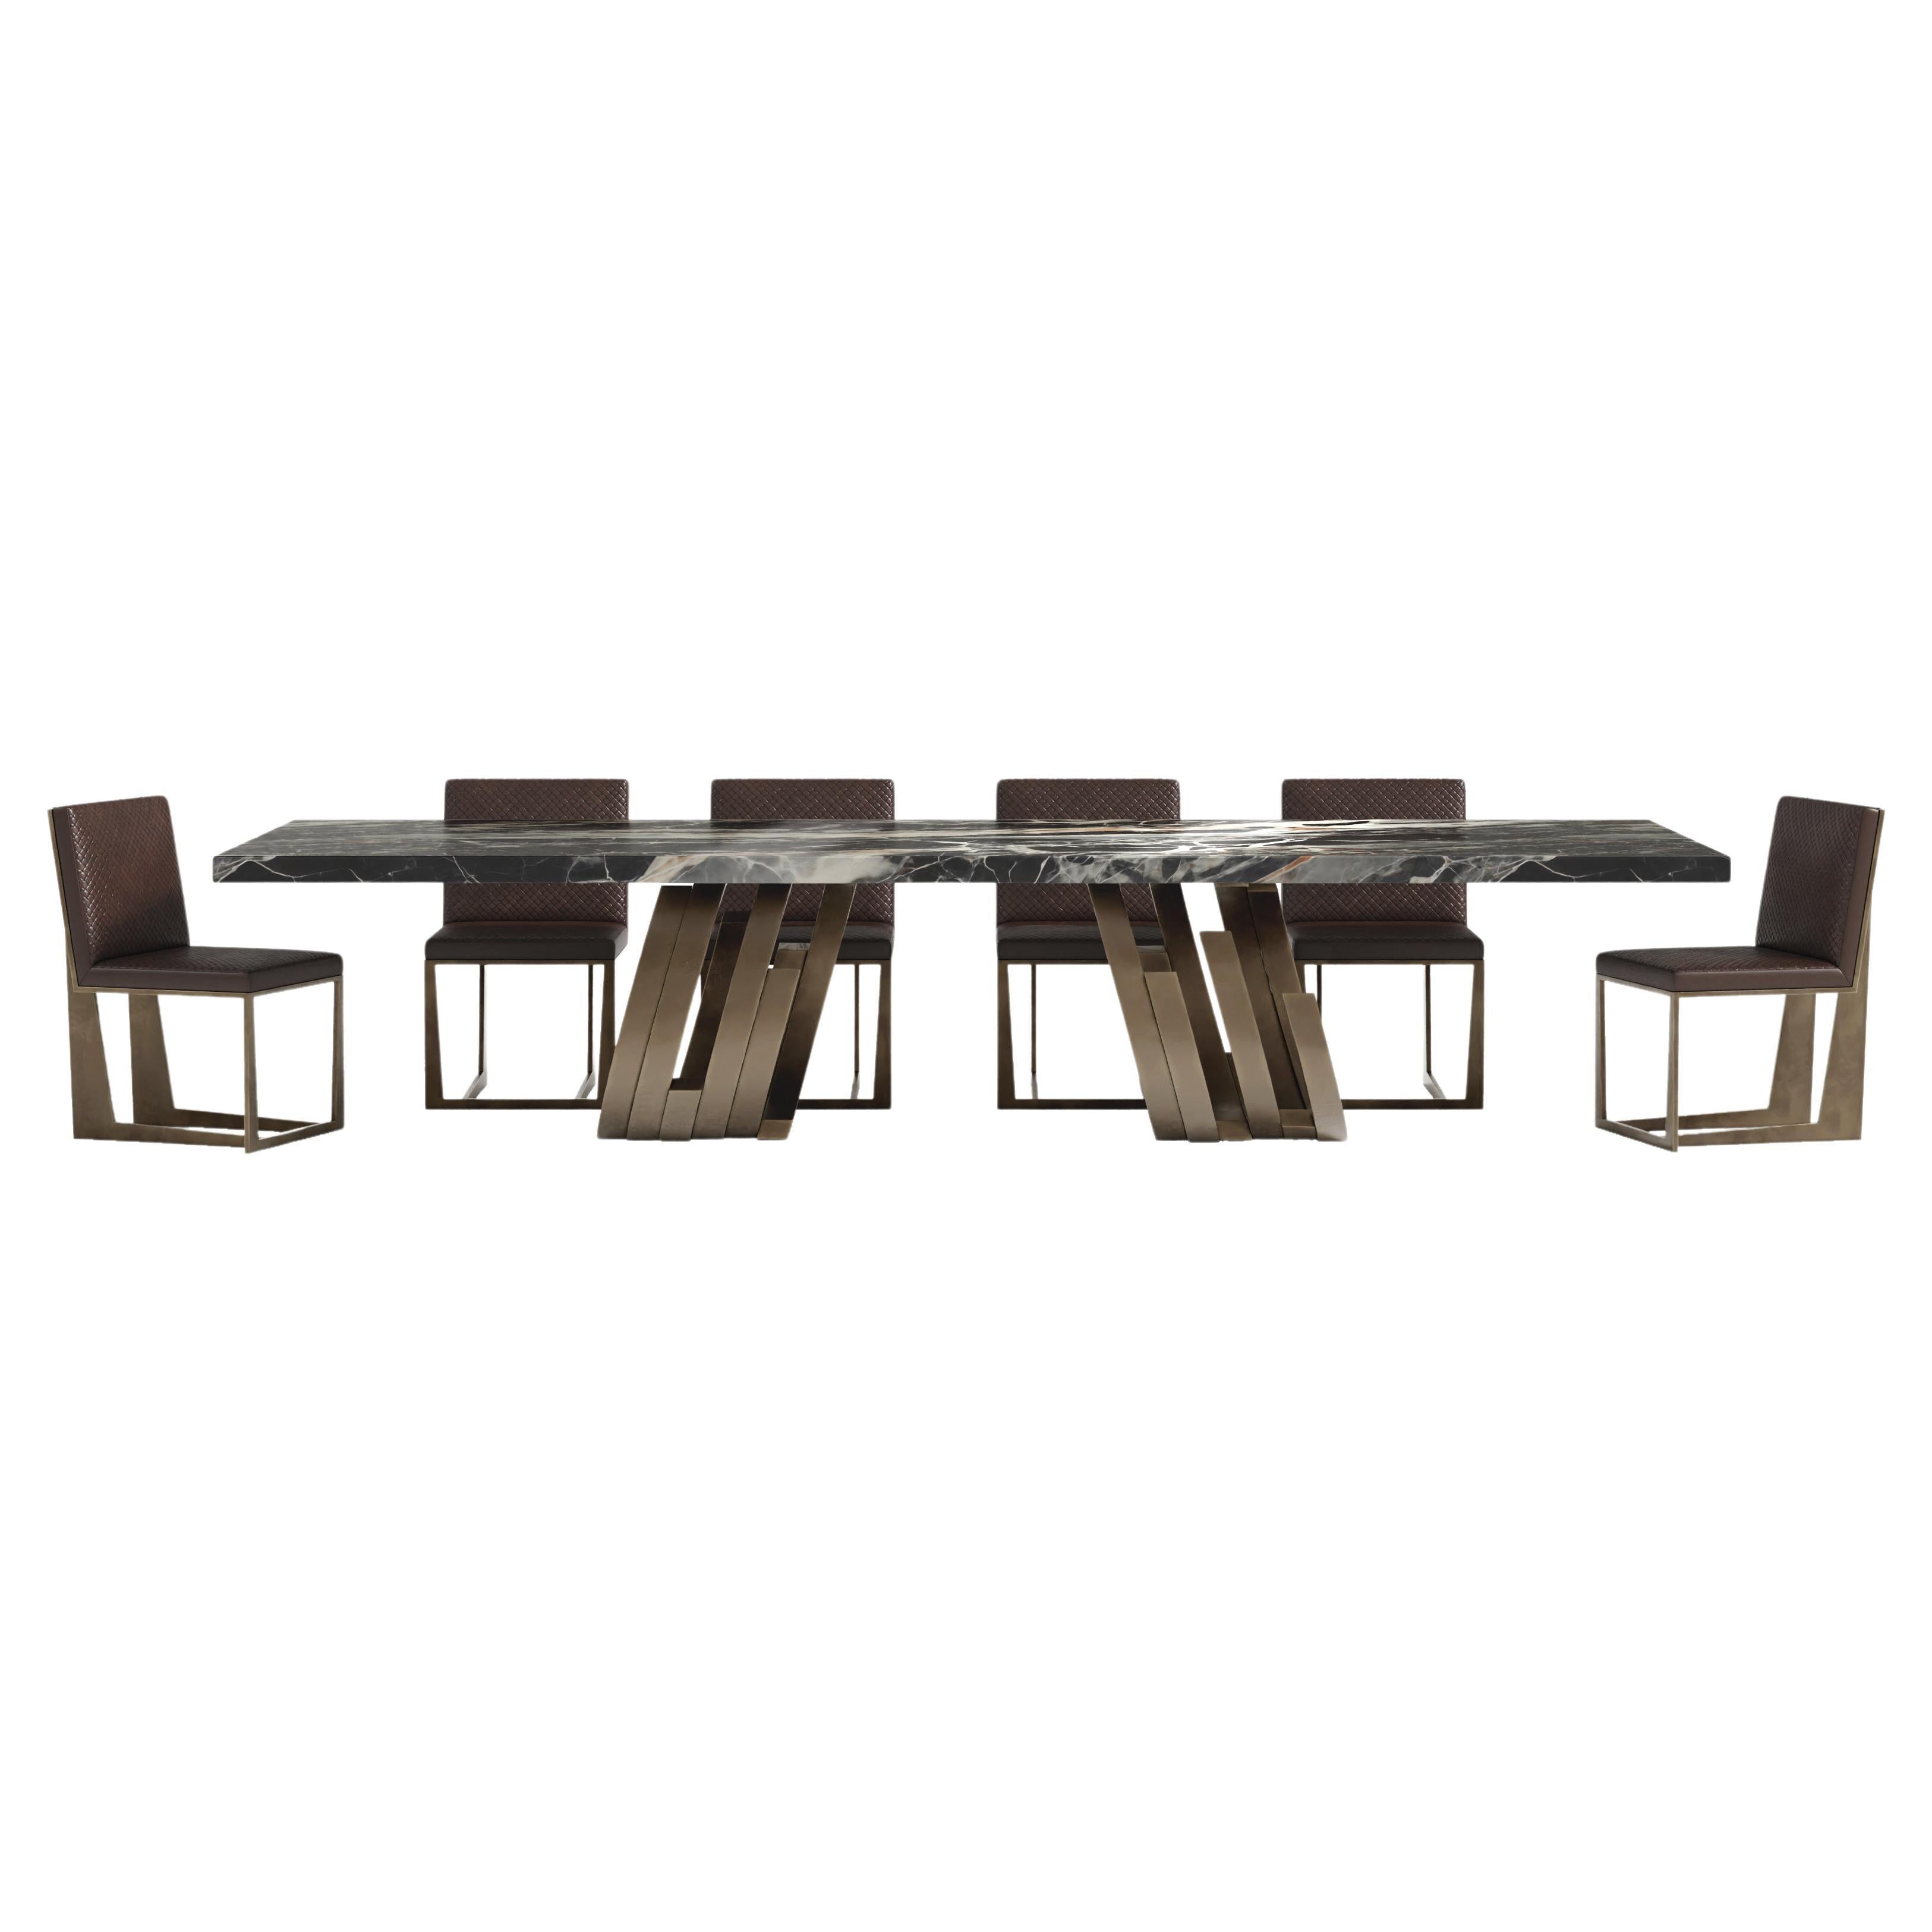 Oculus Dining Table & 10 Affilato Chairs Dining Room Set For Sale